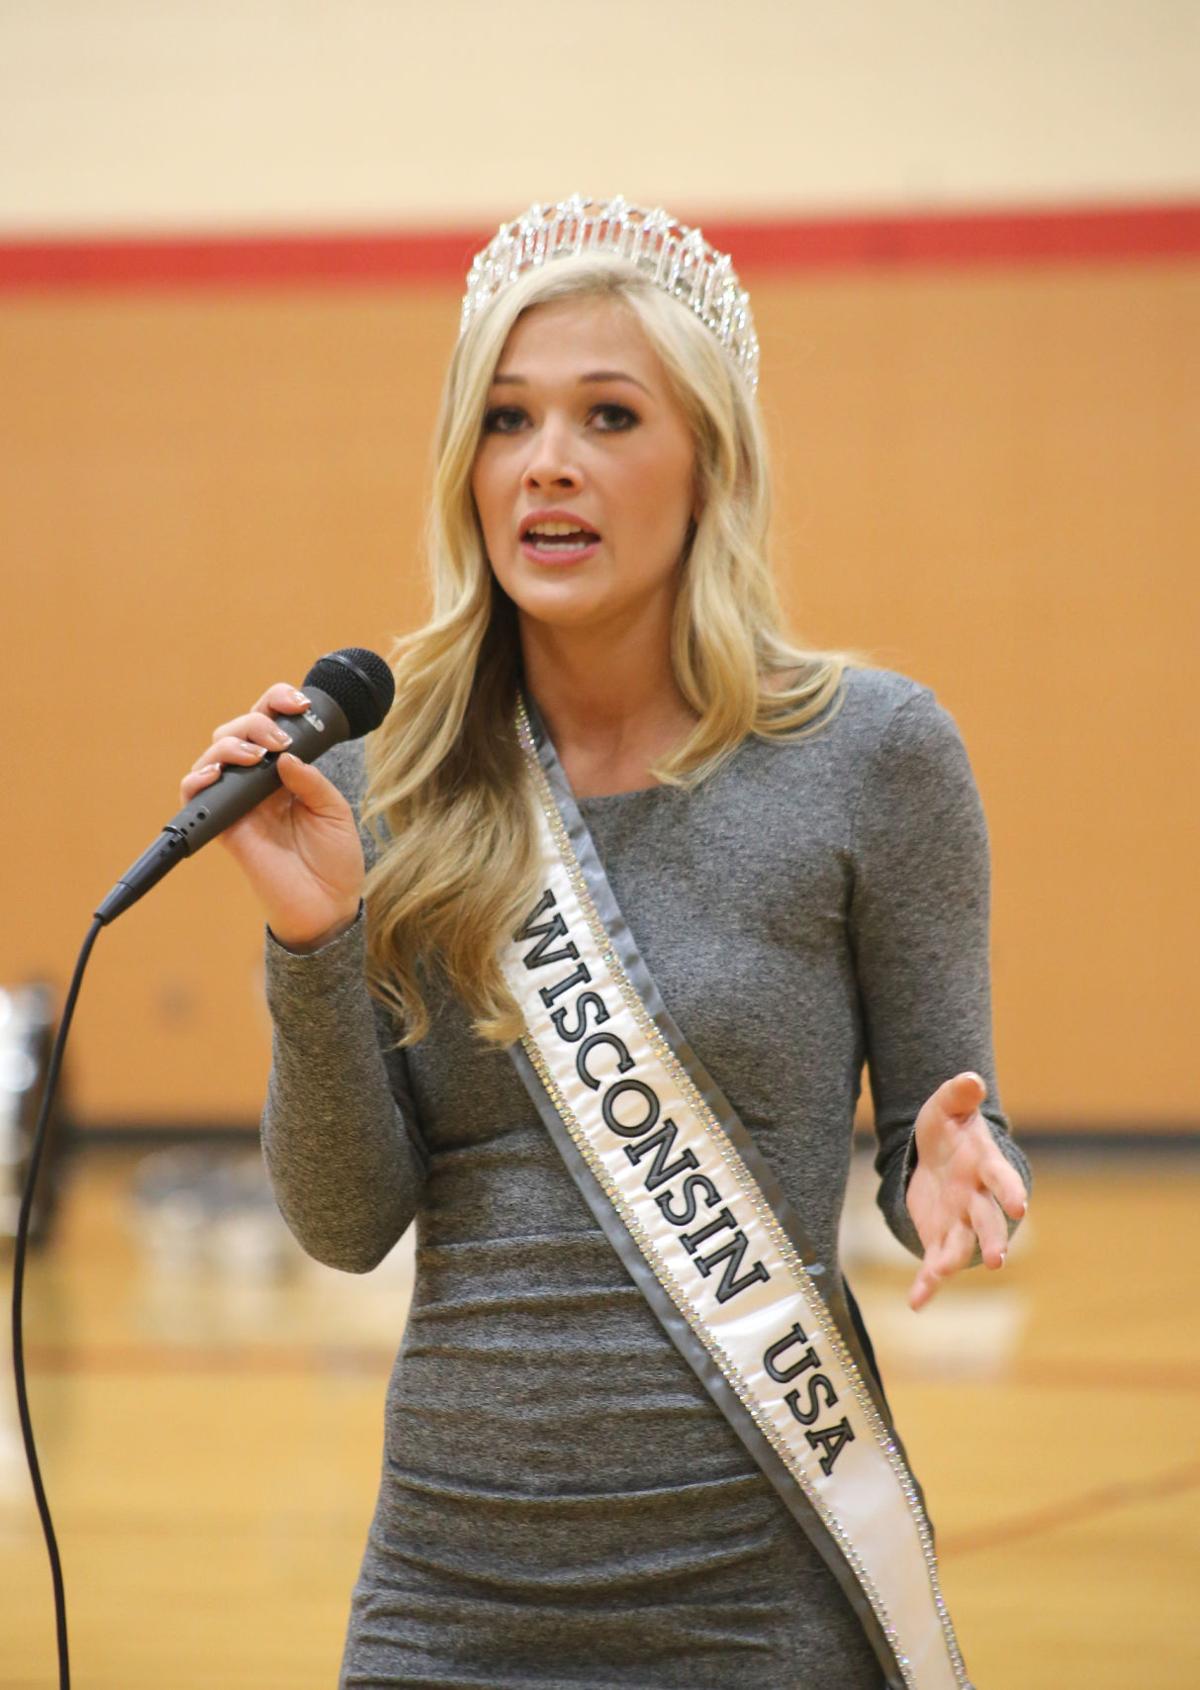 Miss Wisconsin U.S.A. delivers an important message to Amery